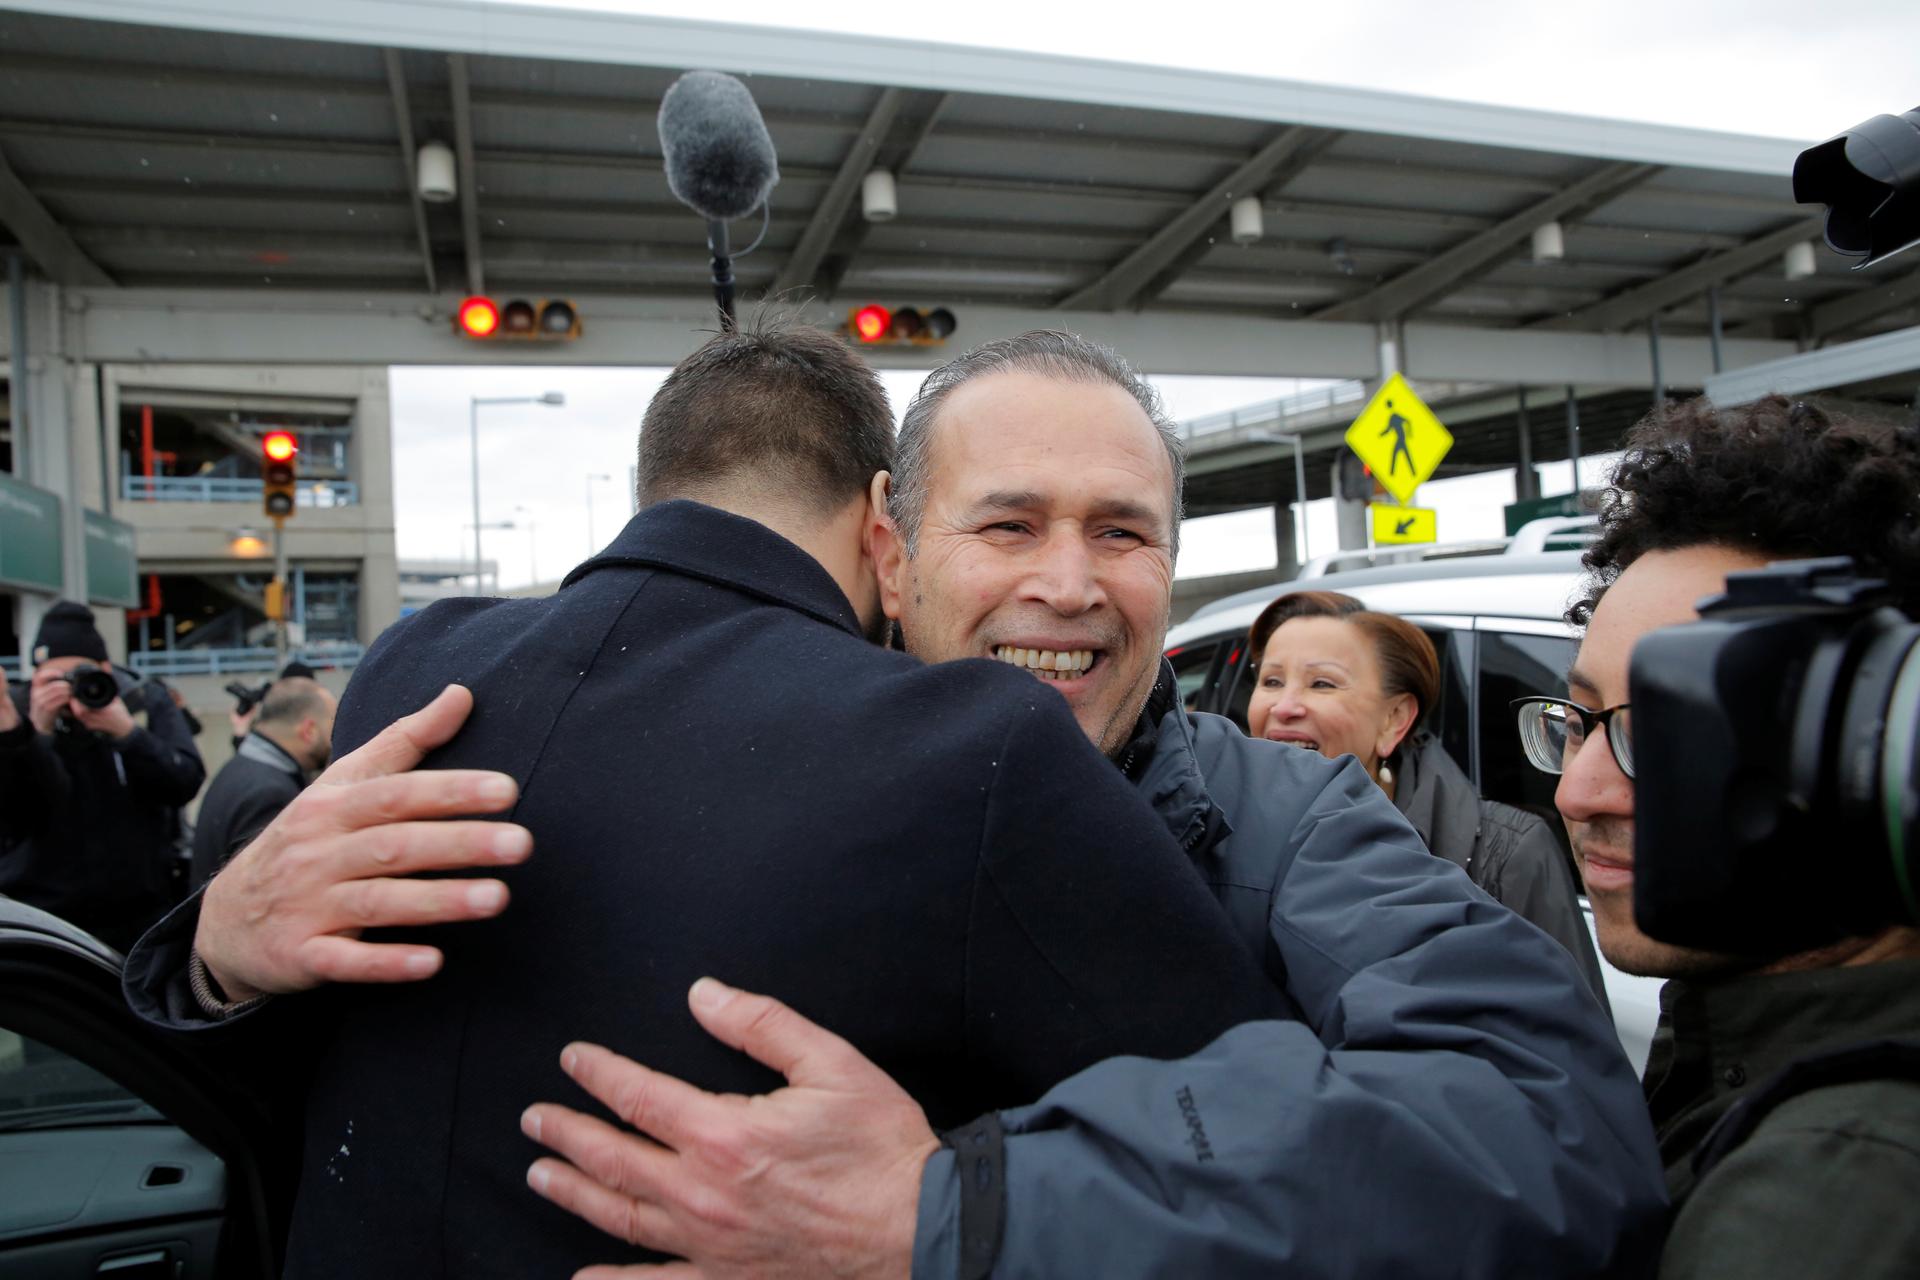 Hameed Darweesh, and Iraqi man who worked as a translator for the US Army, is embraced after being released at John F. Kennedy International Airport in Queens, New York, Jan. 28, 2017.